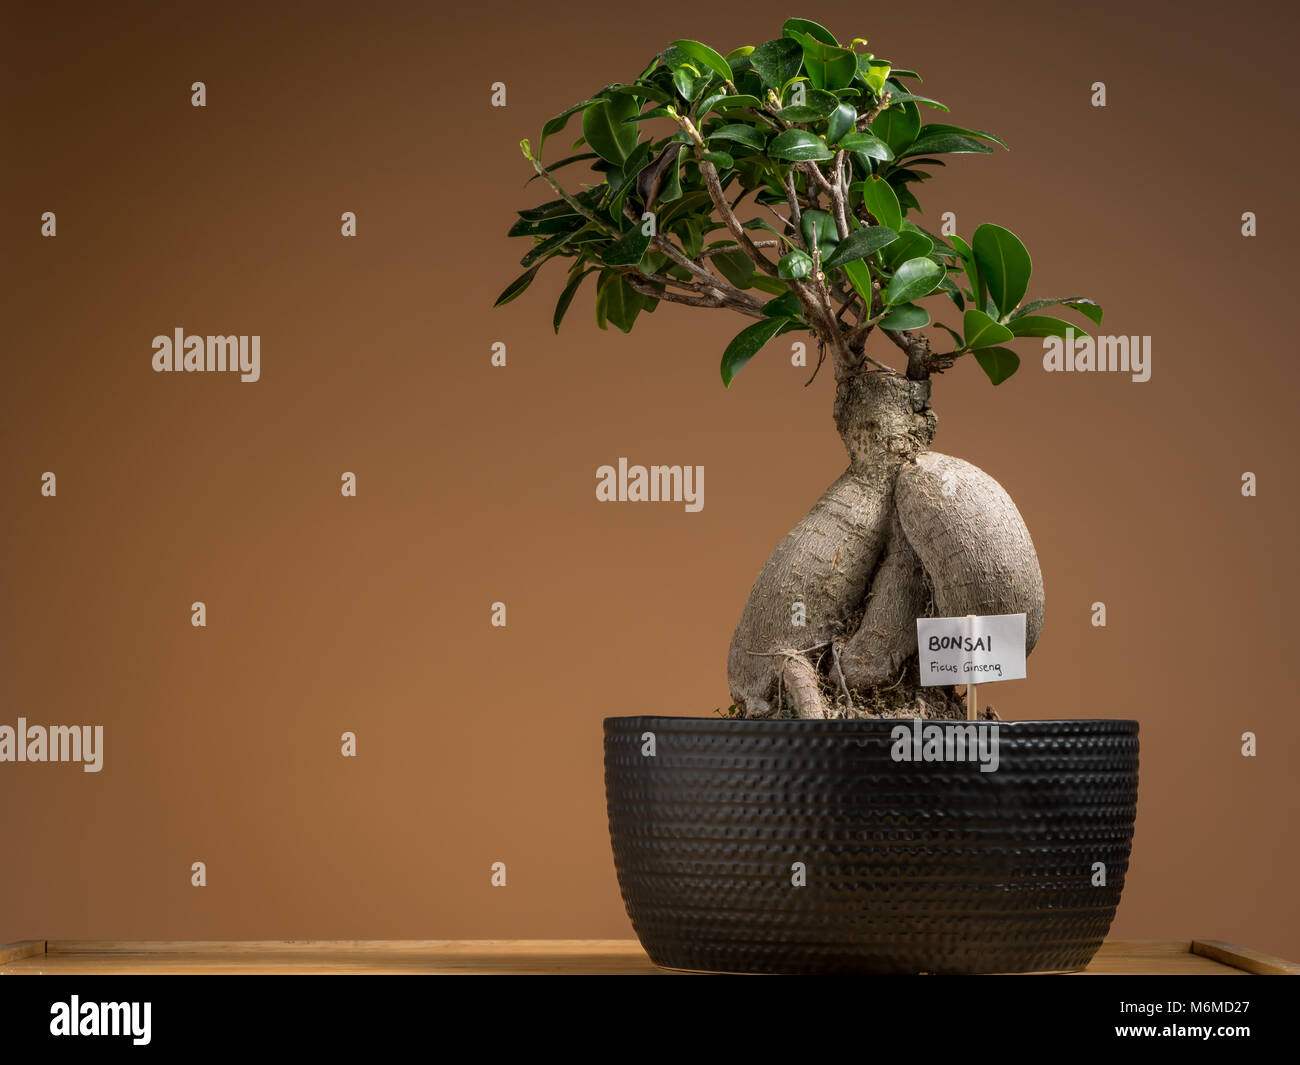 A small bonsai ficus tree (Ficus ginseng) planted in a black pot Stock Photo